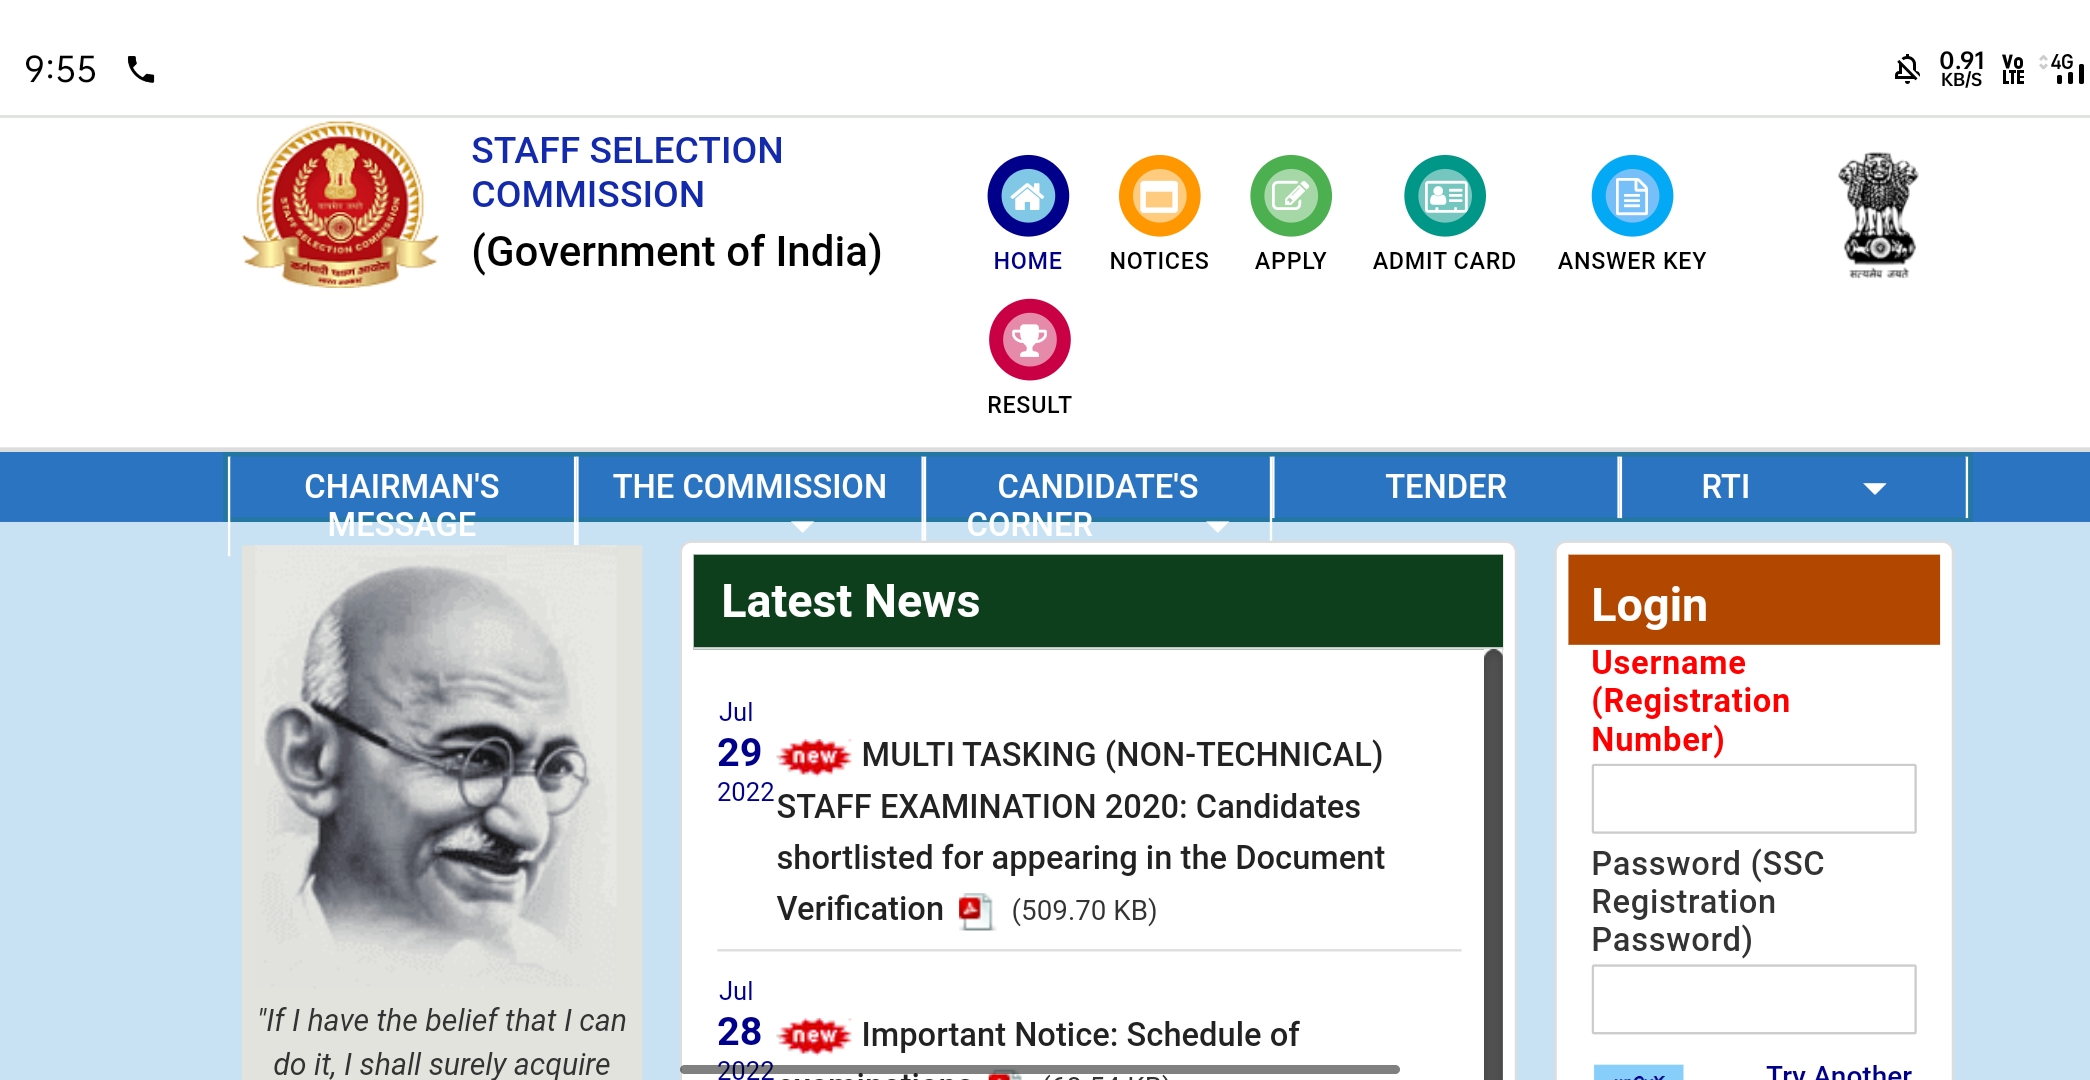 SSC Recruitment 2022 - Submit Your Application Form , SSC Recruitment 2022-23,SSC Recruitment 2022 Apply Online, ssc.nic.in SSC Recruitment 2022